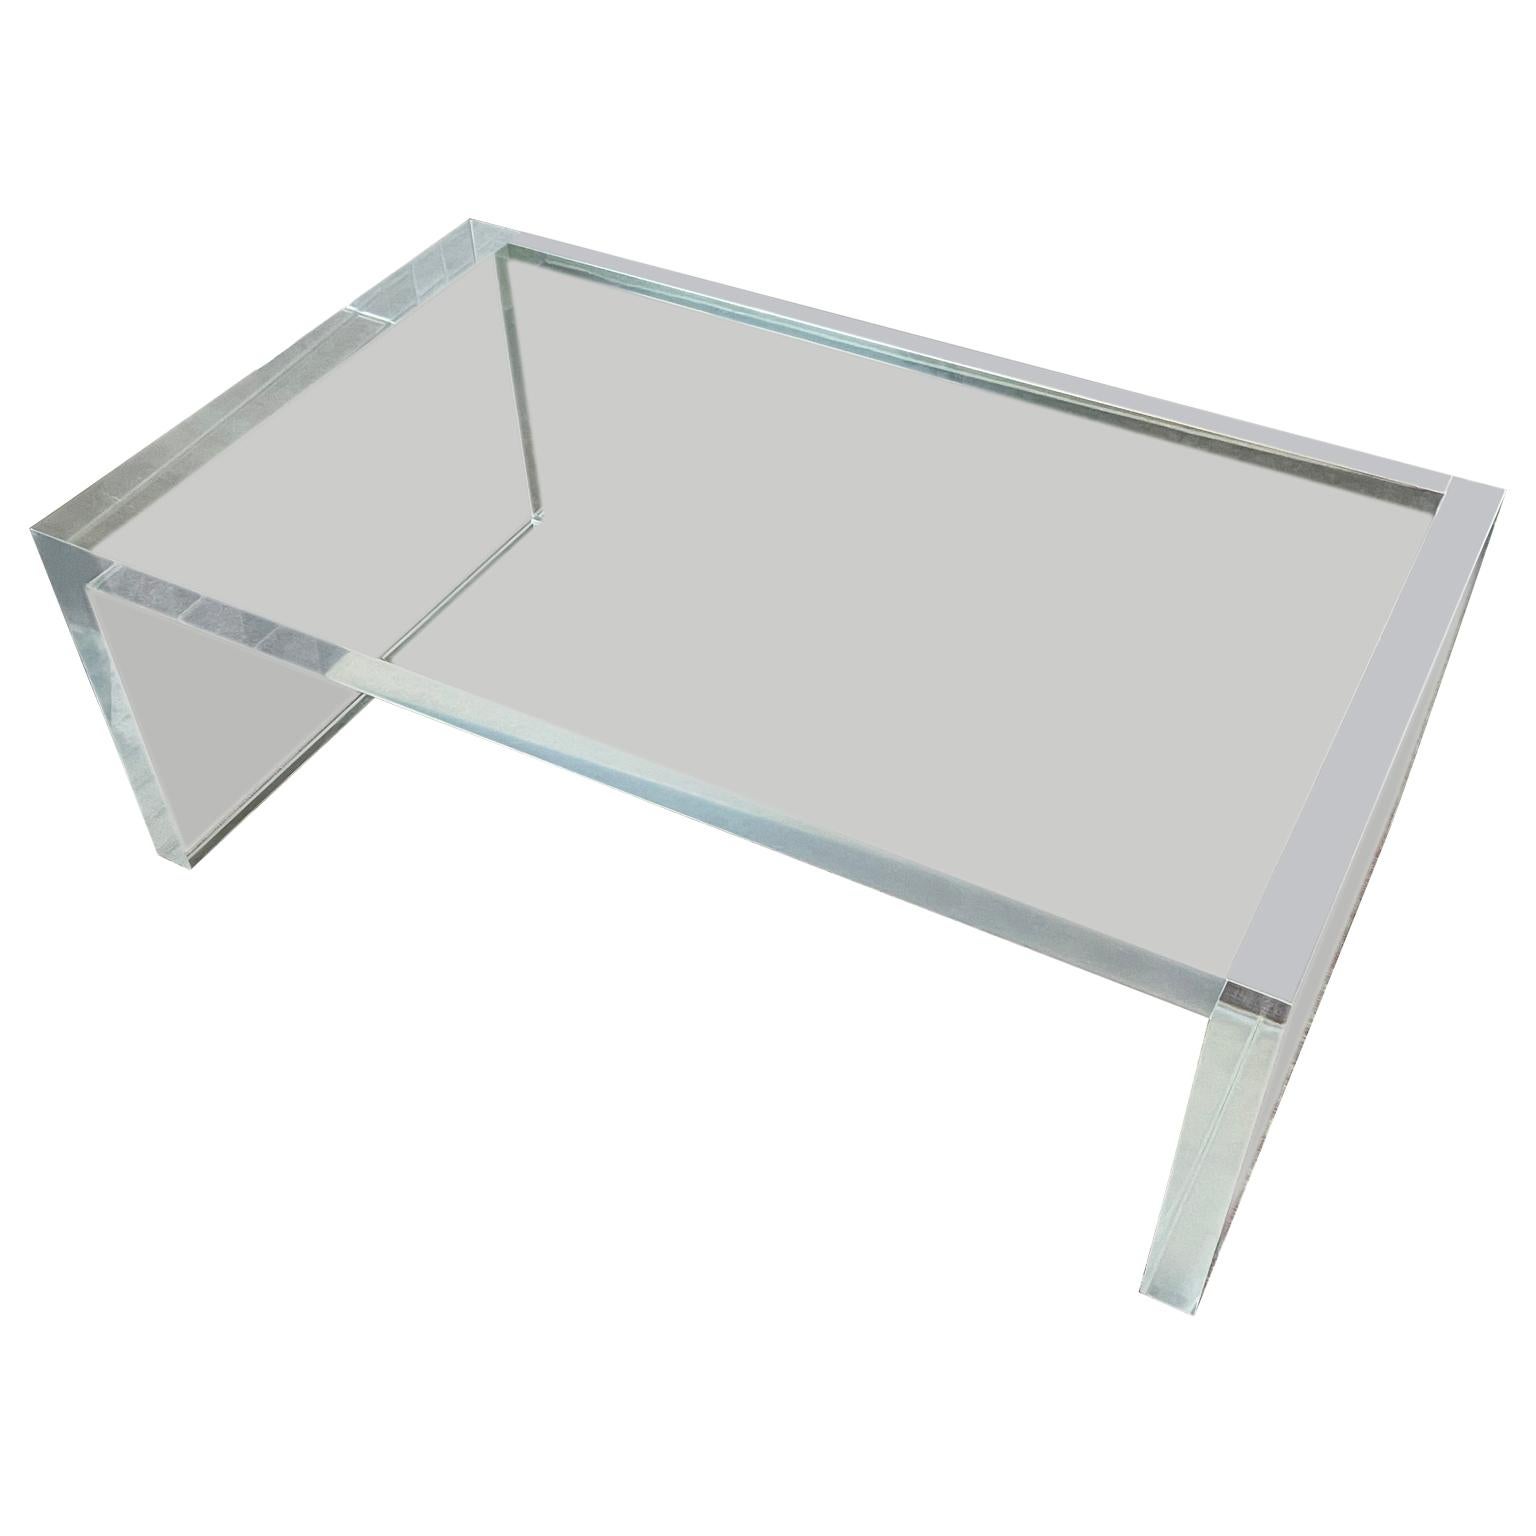 Hand-Crafted Large Rectangular Thick Lucite Coffee or Cocktail Table Hollis Era